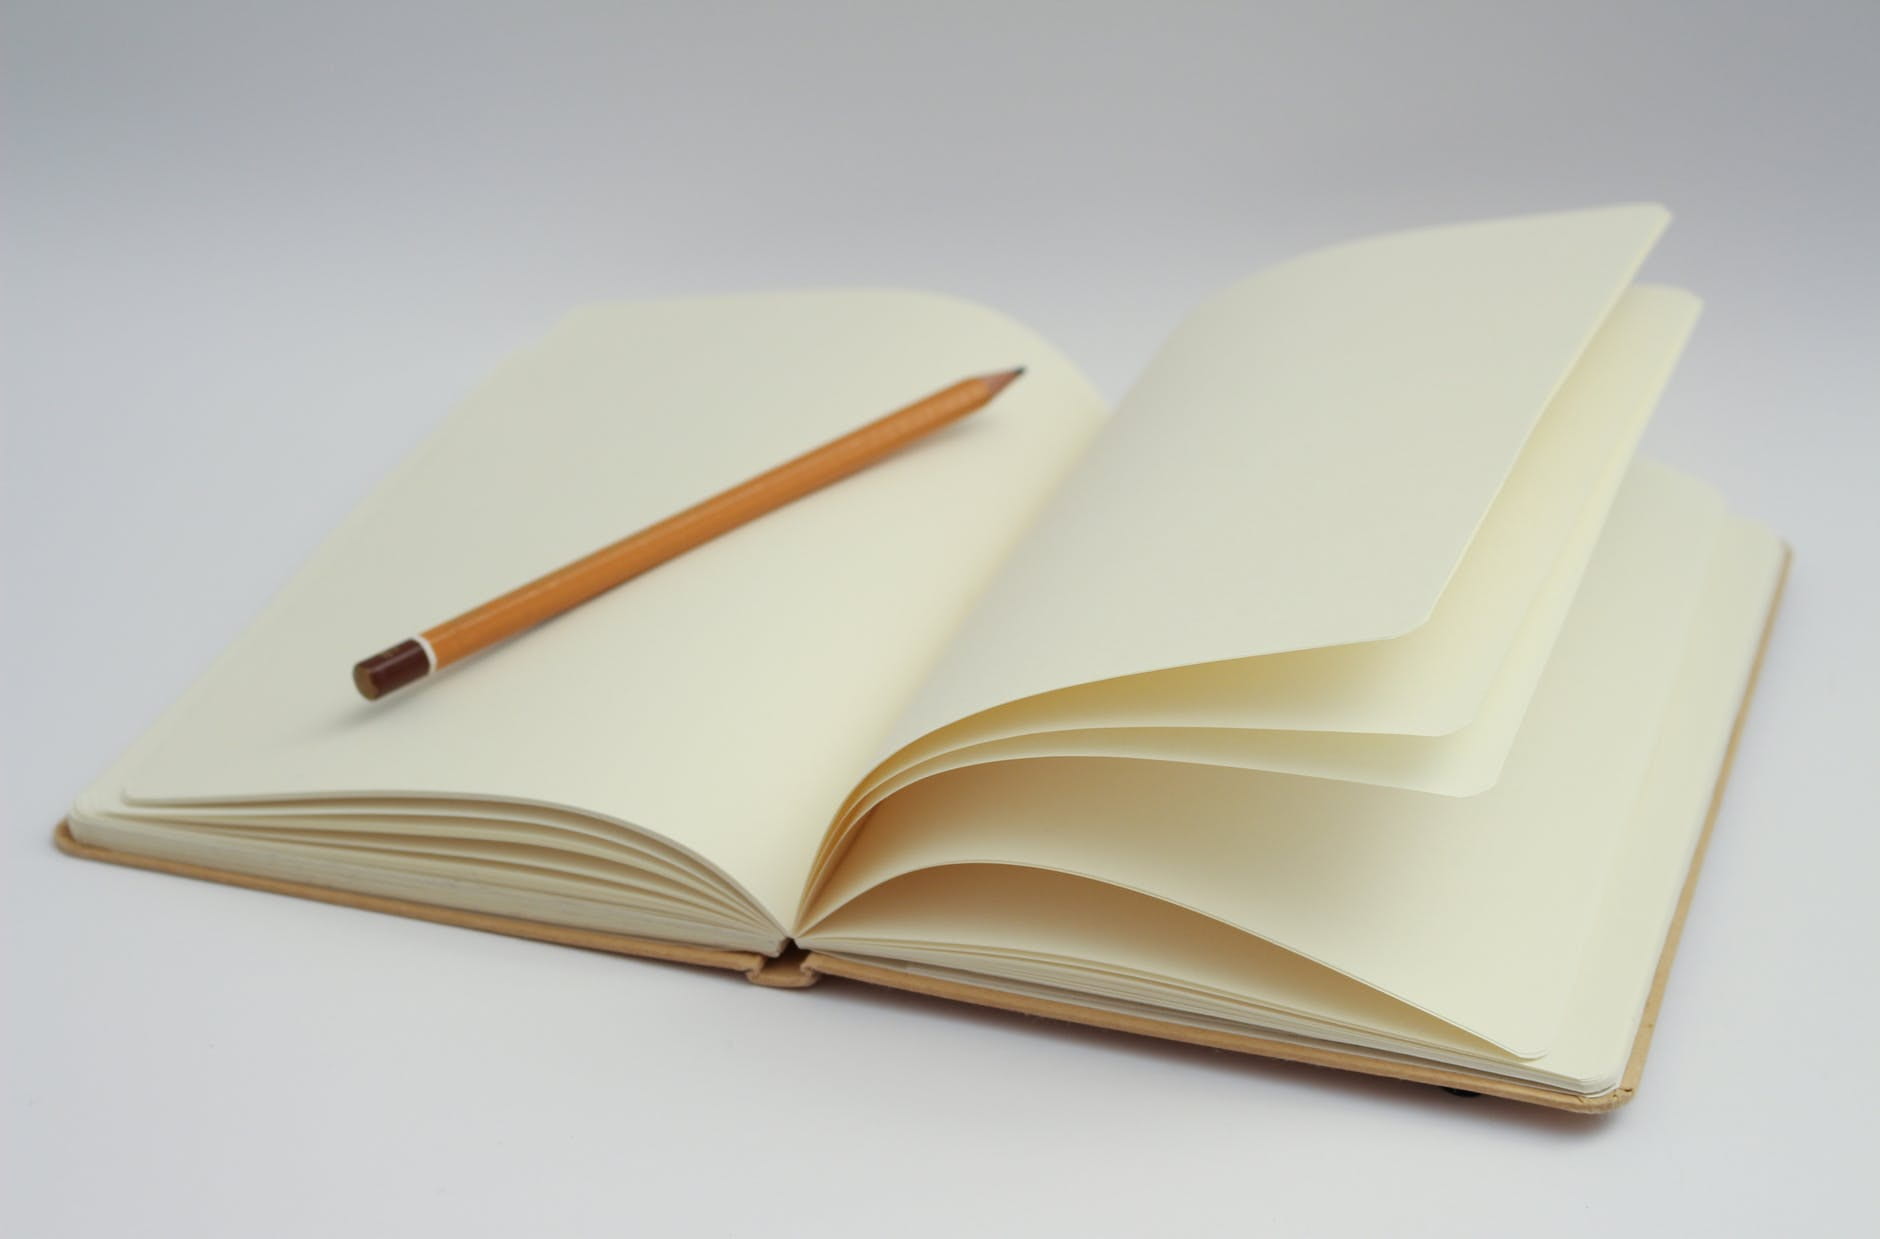 A pencil laying flat on a journal